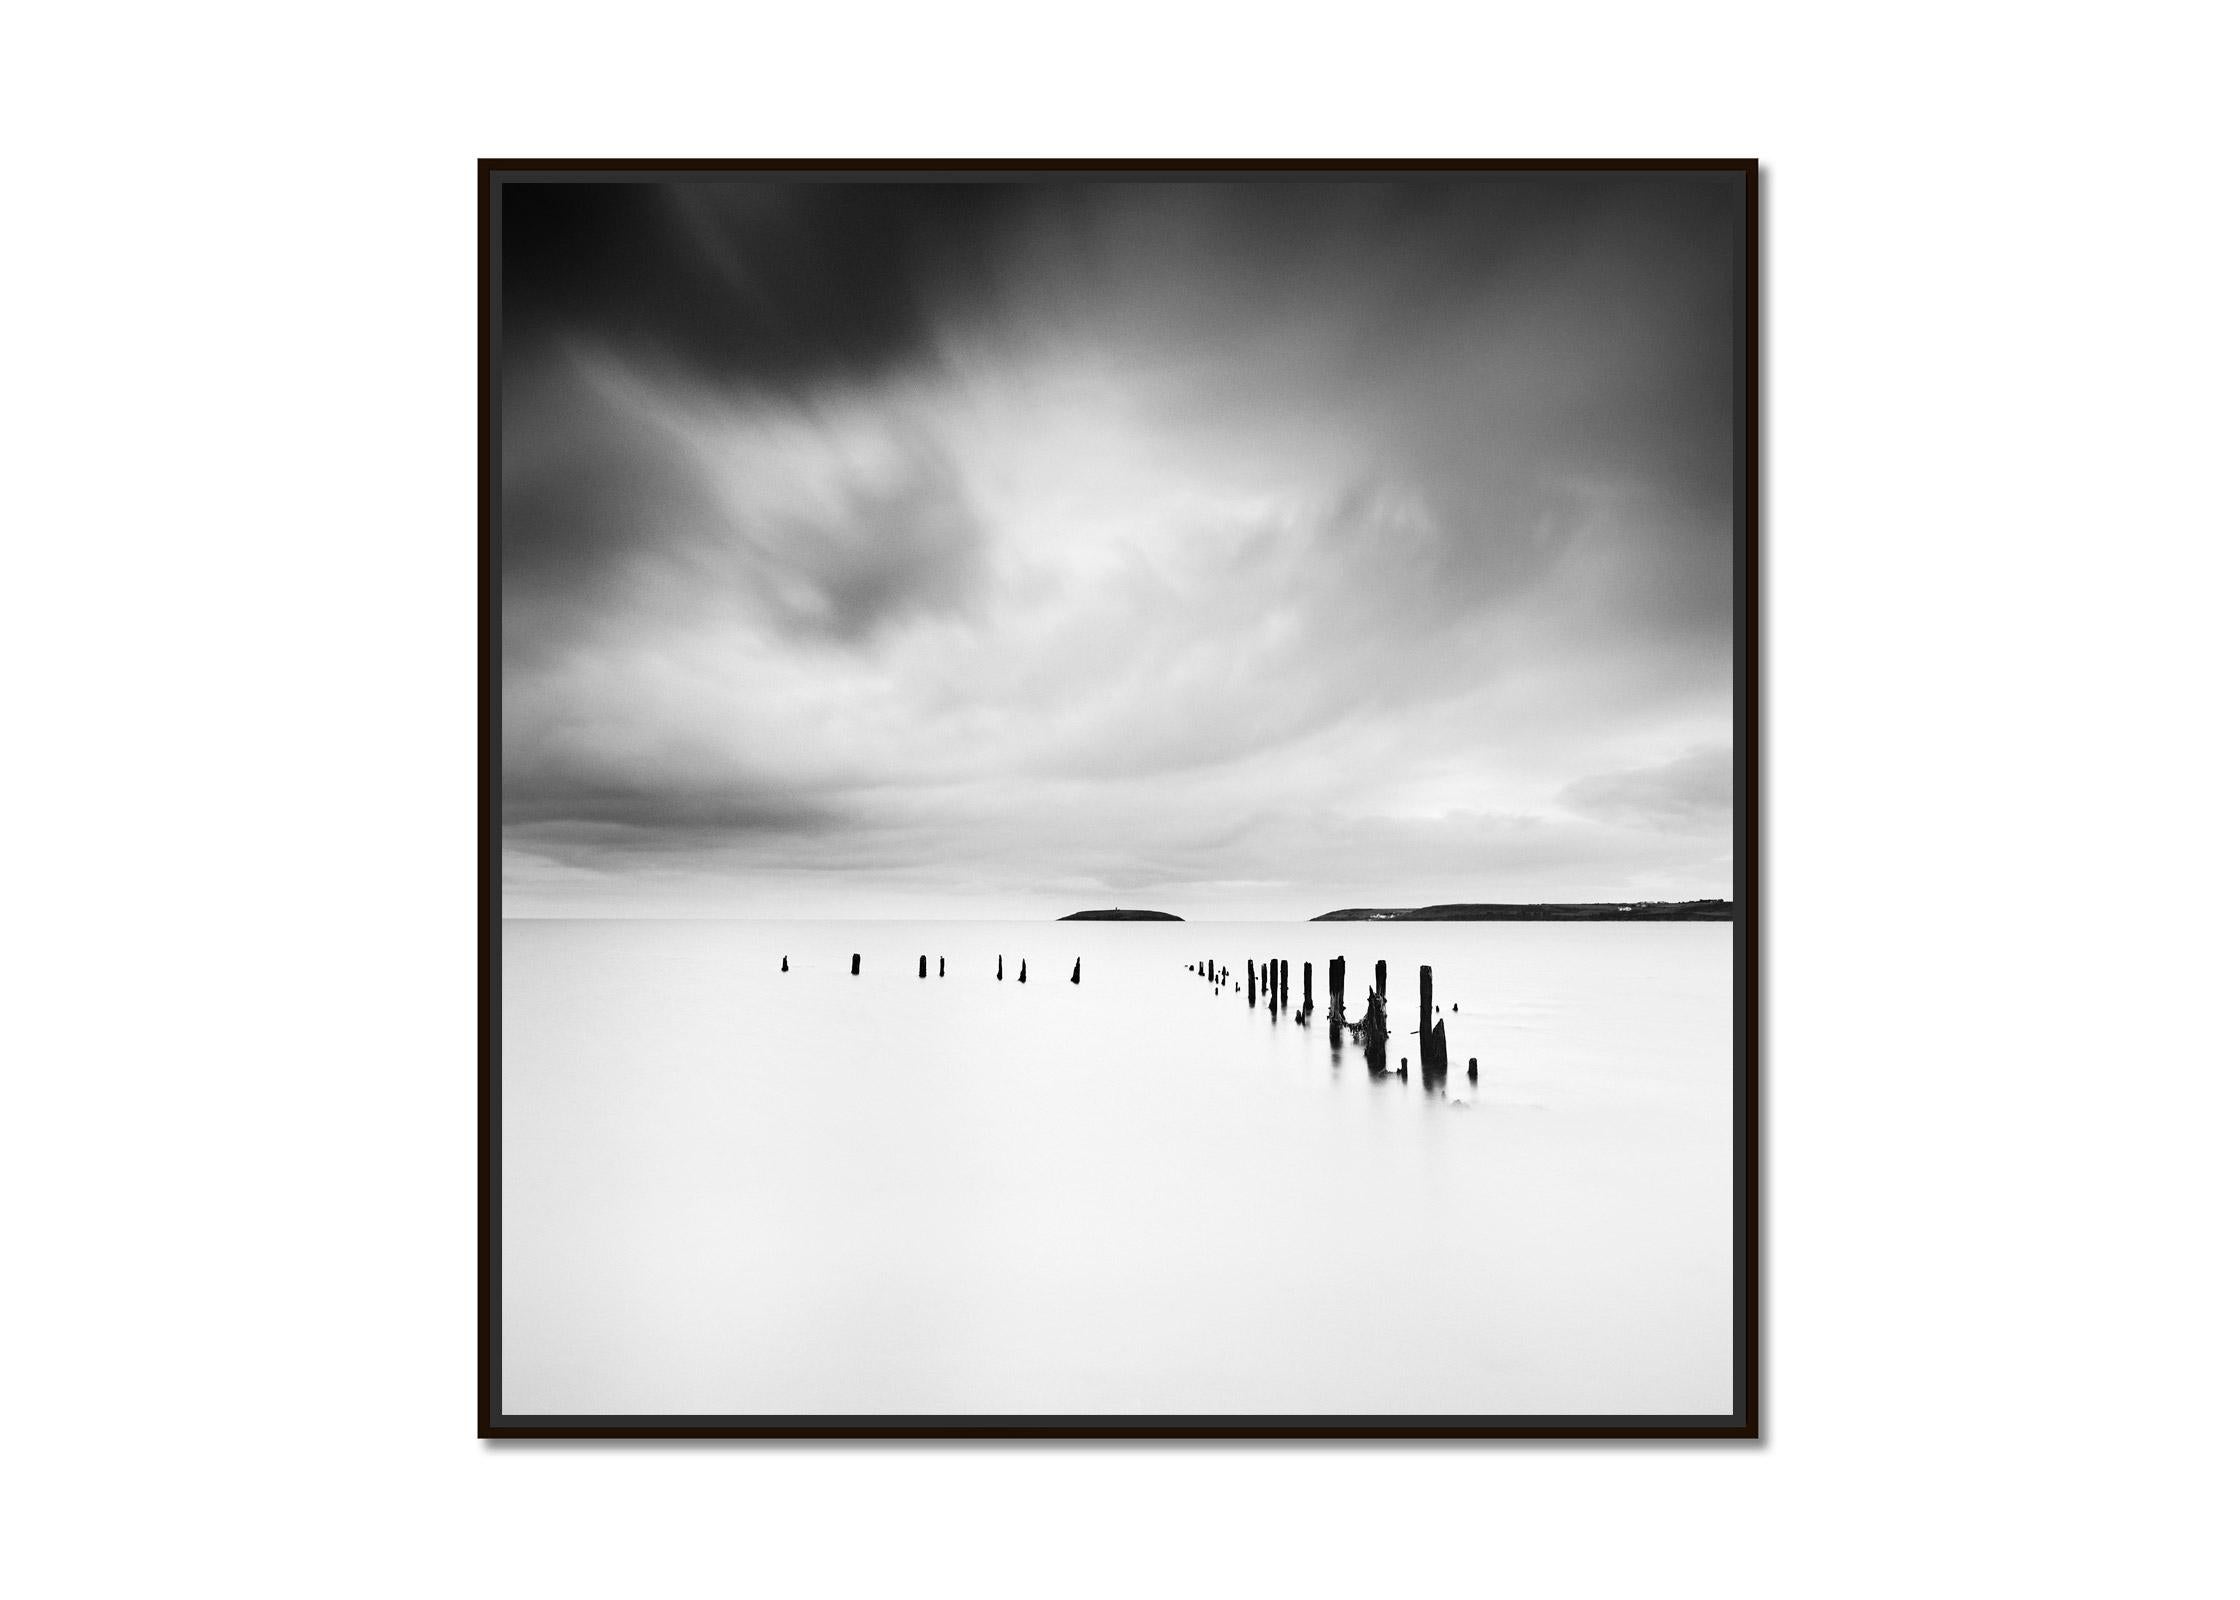 The Island, wavebreaker, stormy, Ireland, black and white landscape photography - Photograph by Gerald Berghammer